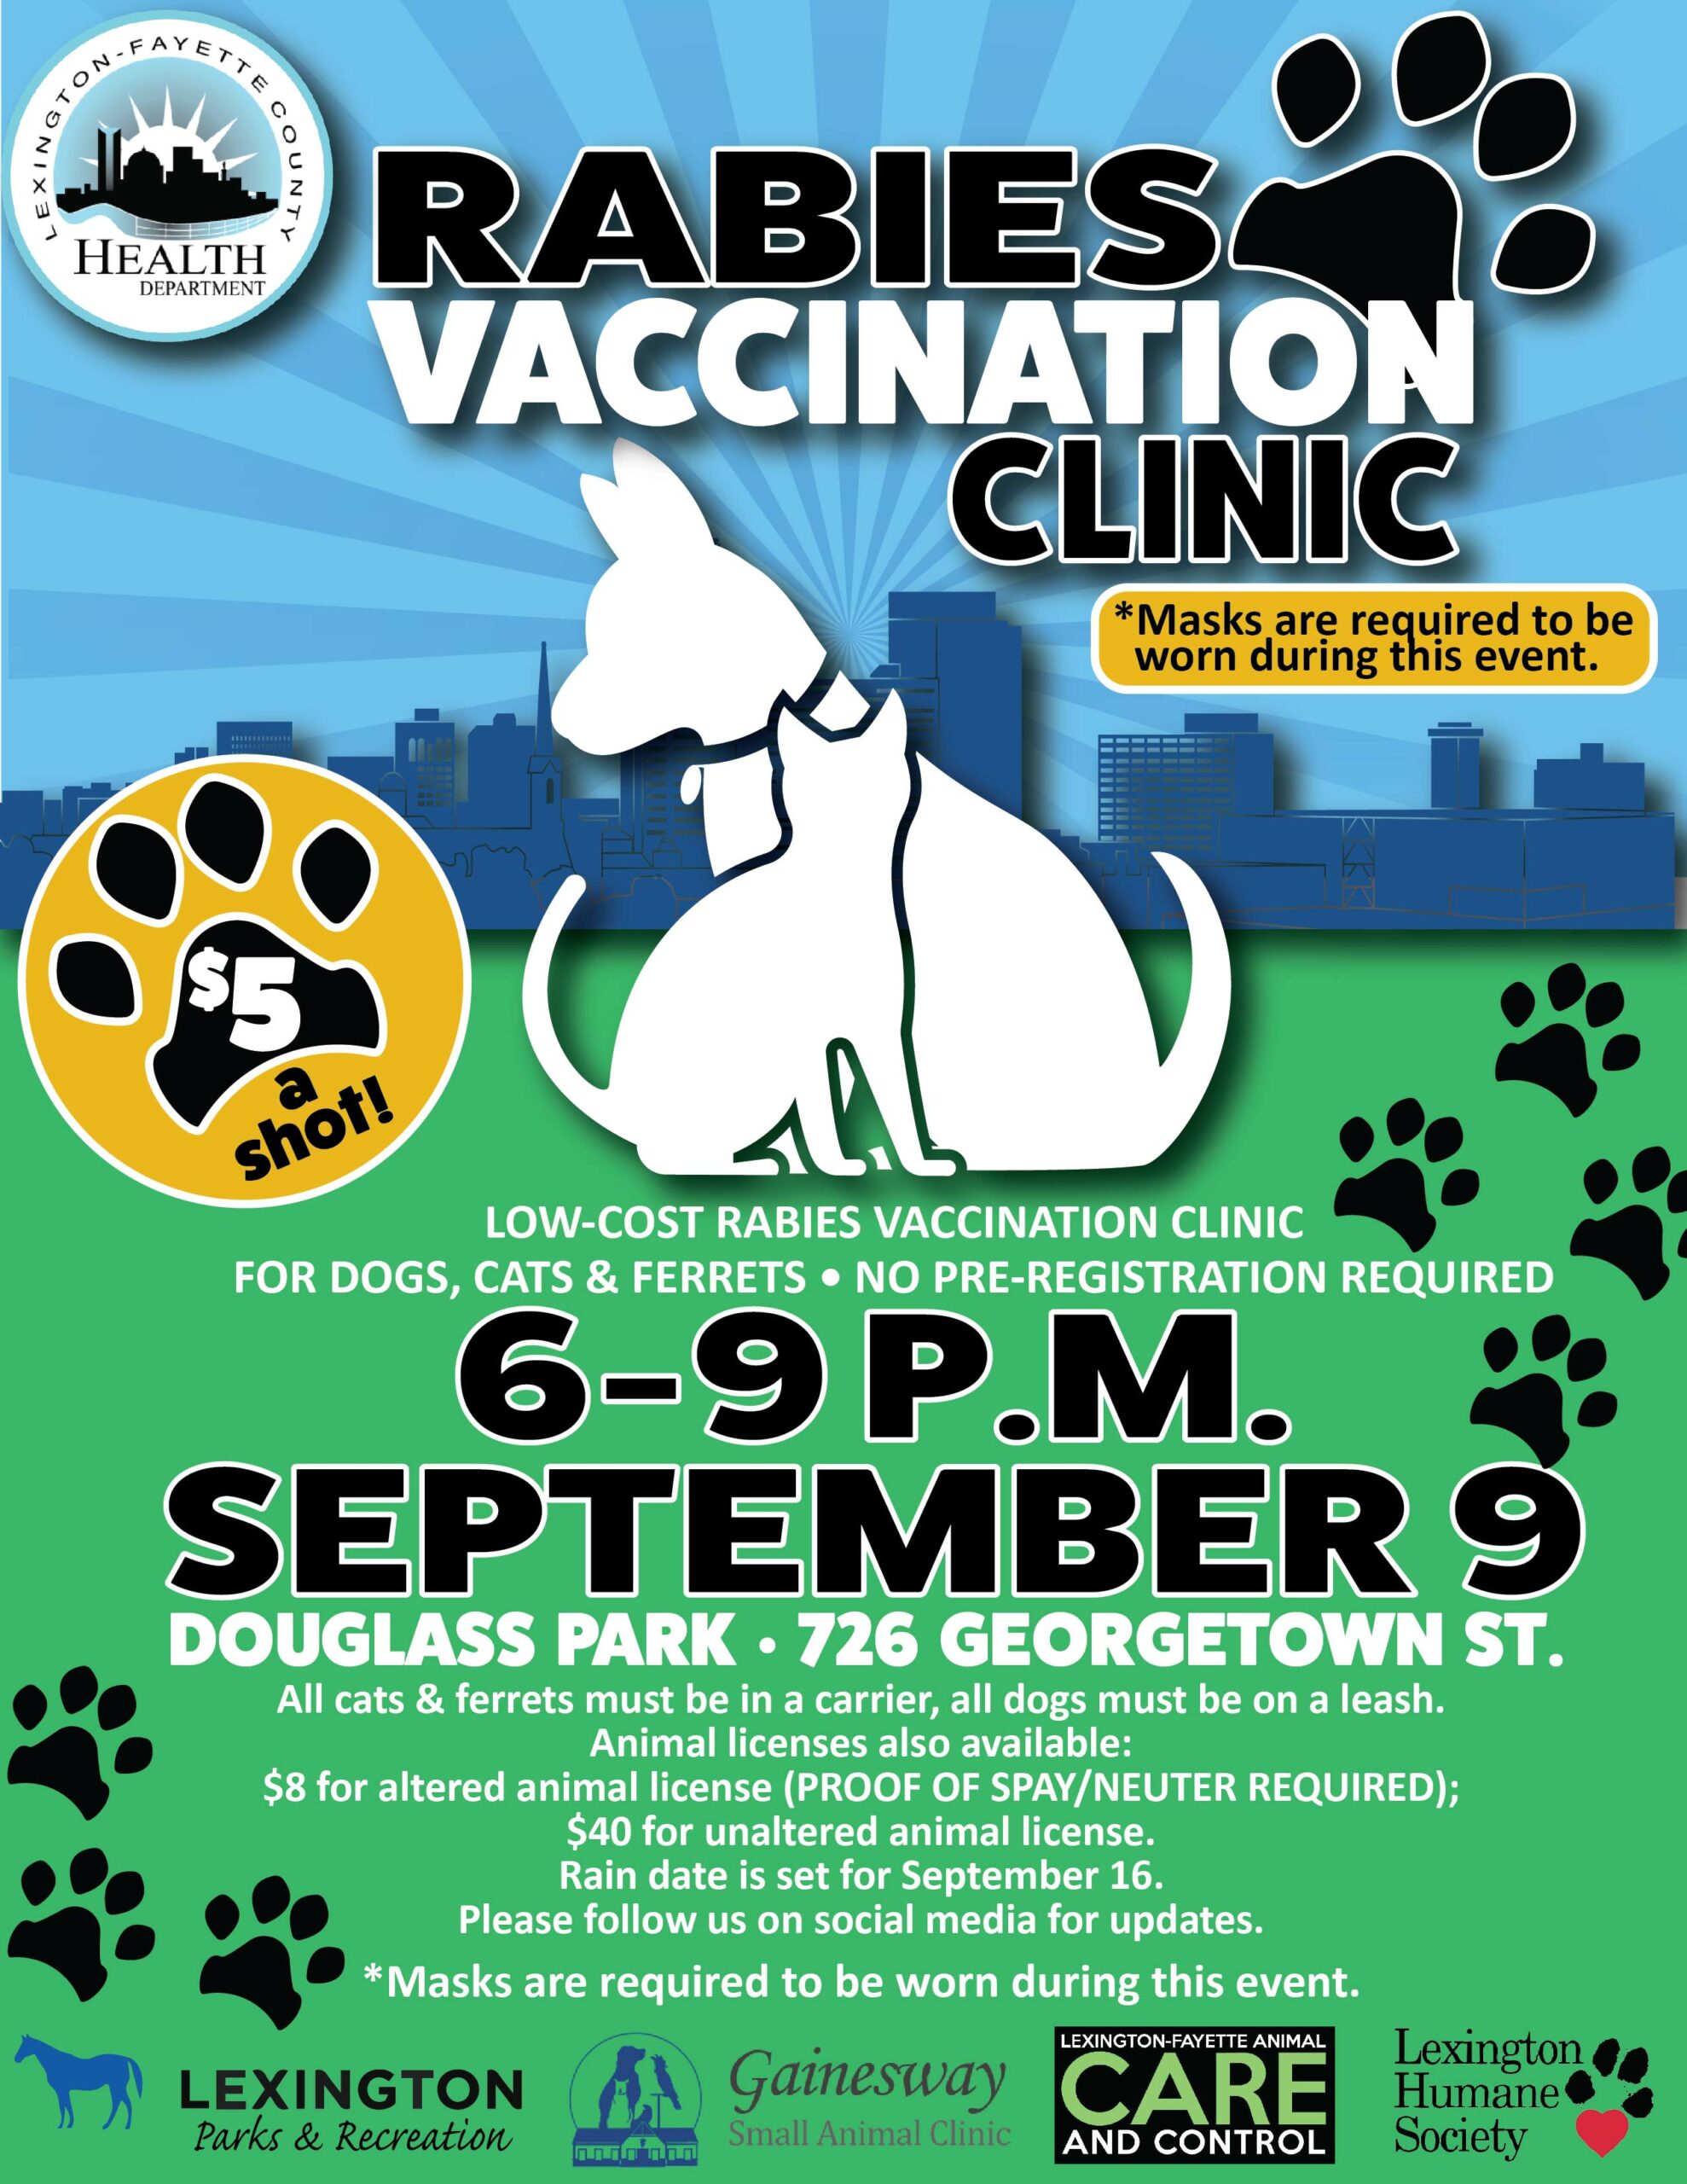 LFCHD to host low-cost rabies vaccination clinic Sept. 9 at Douglass Park –  Lexington-Fayette County Health Department